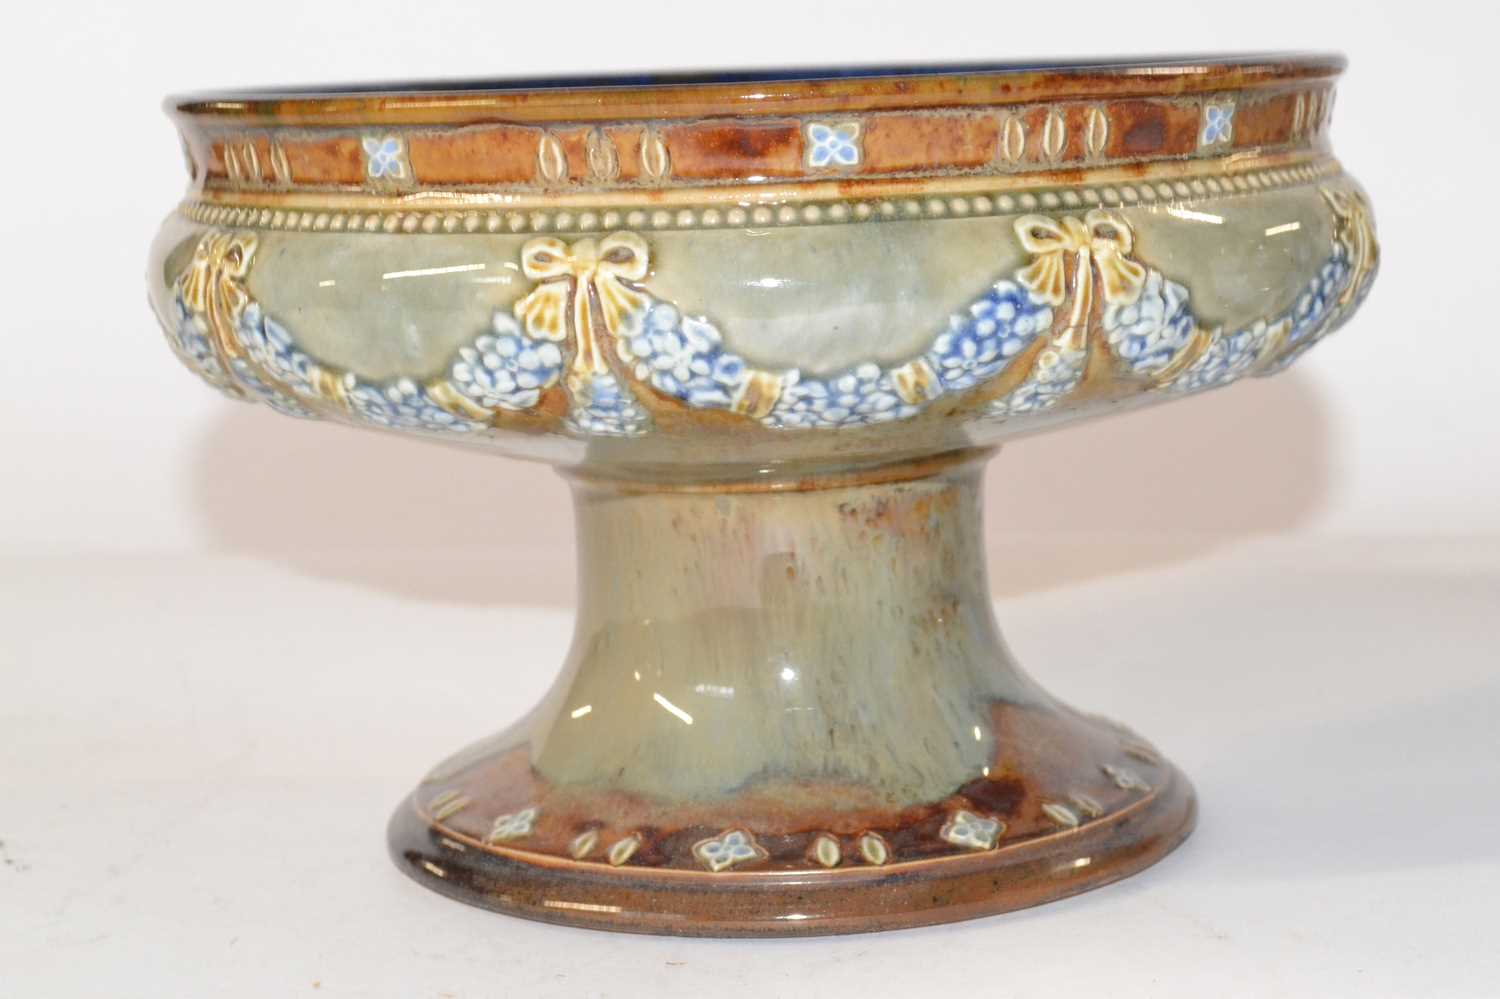 A pair of Royal Doulton tazzae, both with applied floral design of swags, 19cm diameters - Image 3 of 4